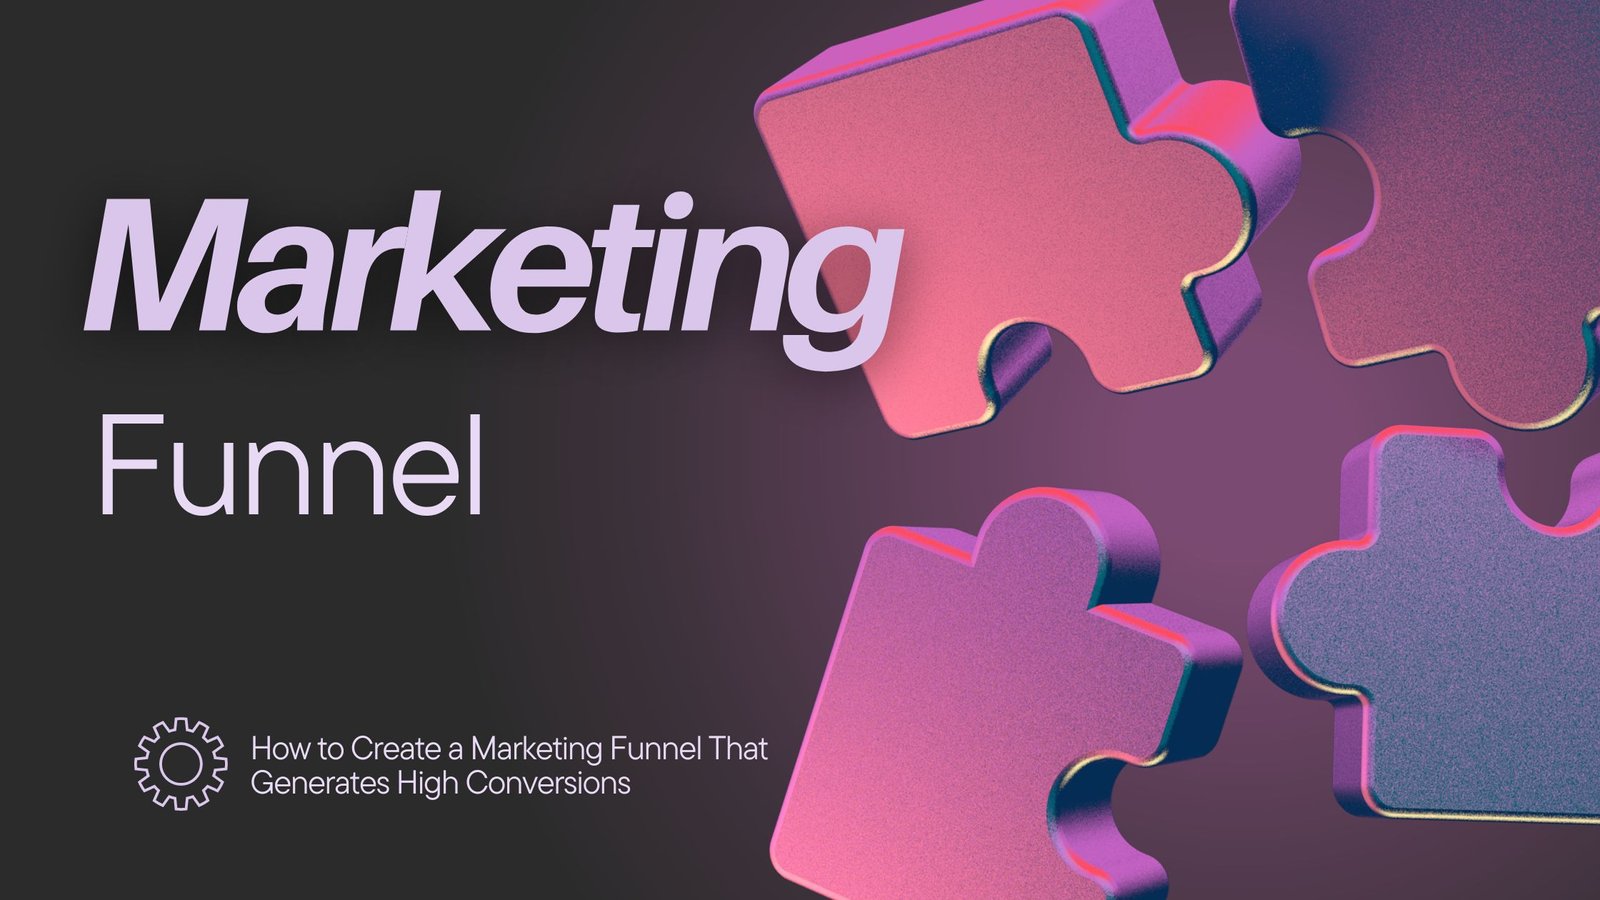 How to Create a Marketing Funnel That Generates High Conversions